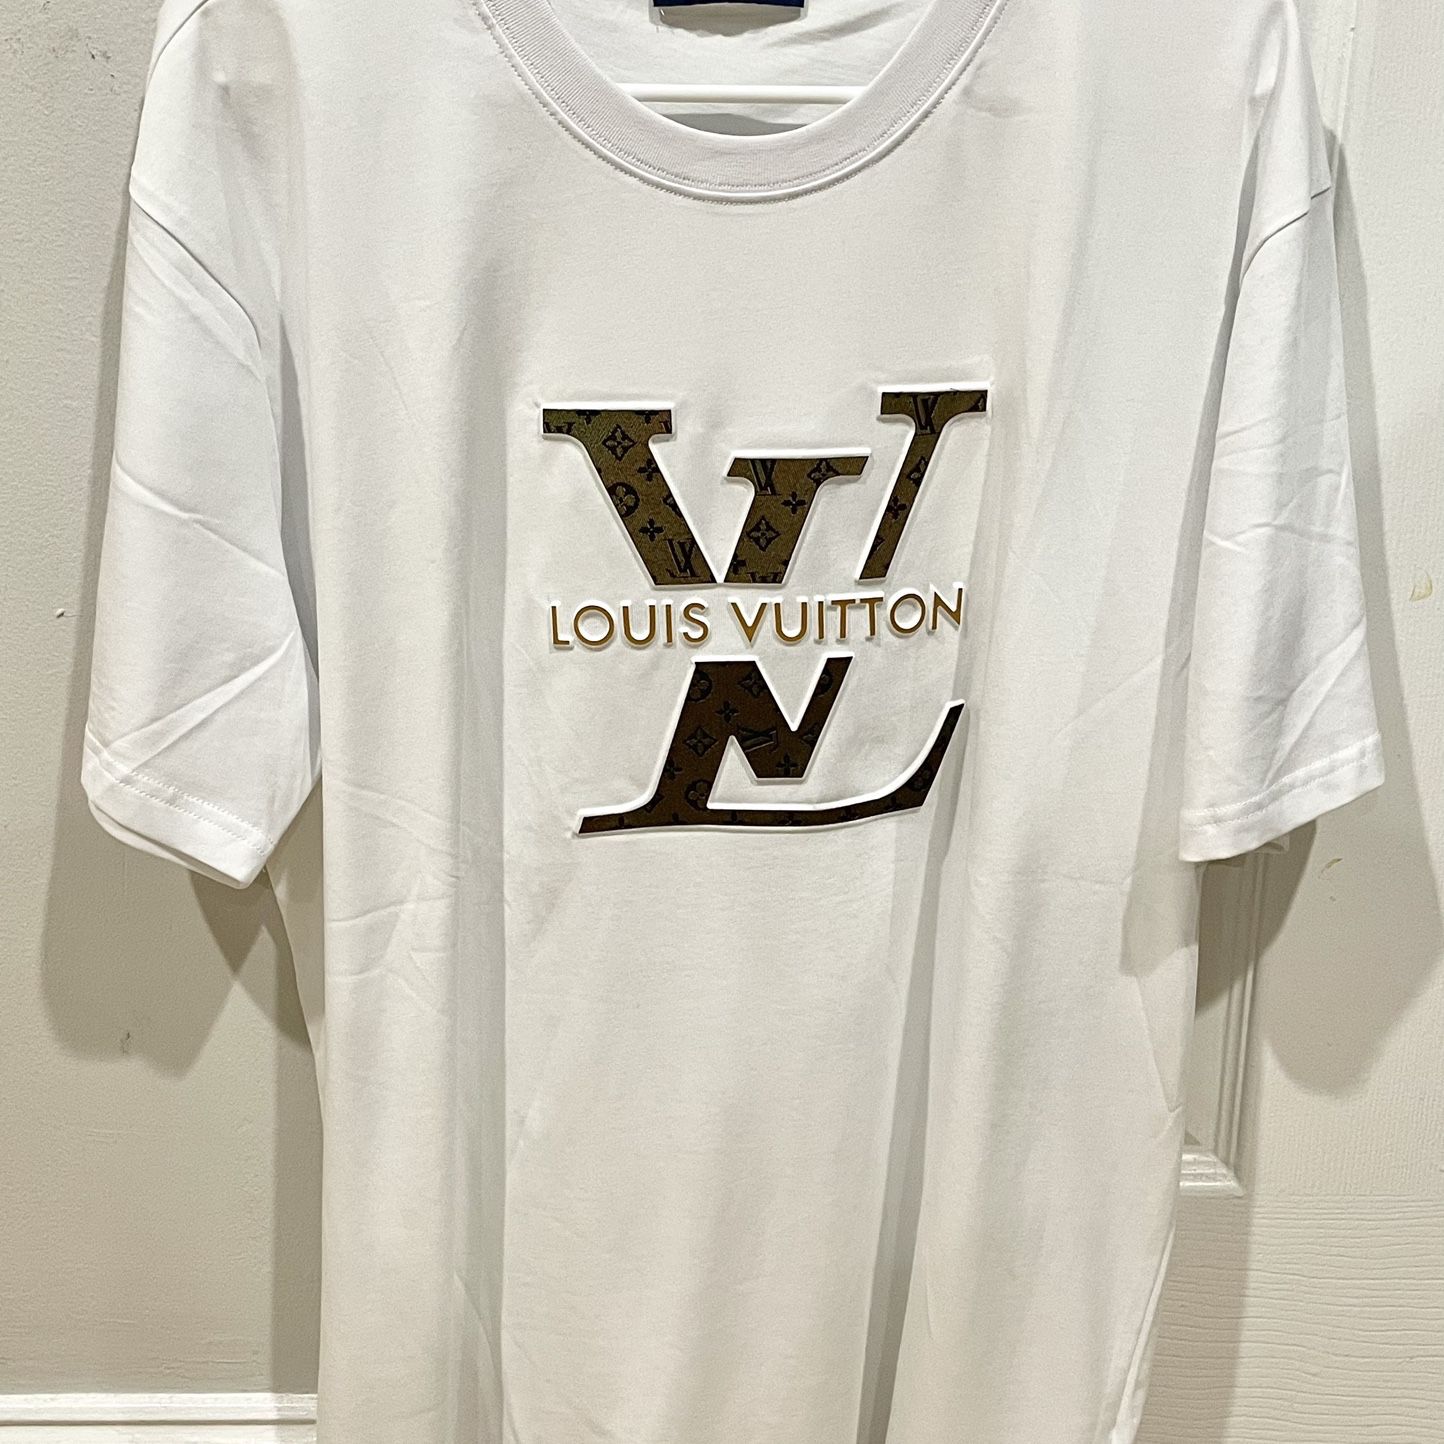 Men's Louis Vuitton T-Shirt Size XL for Sale in The Bronx, New